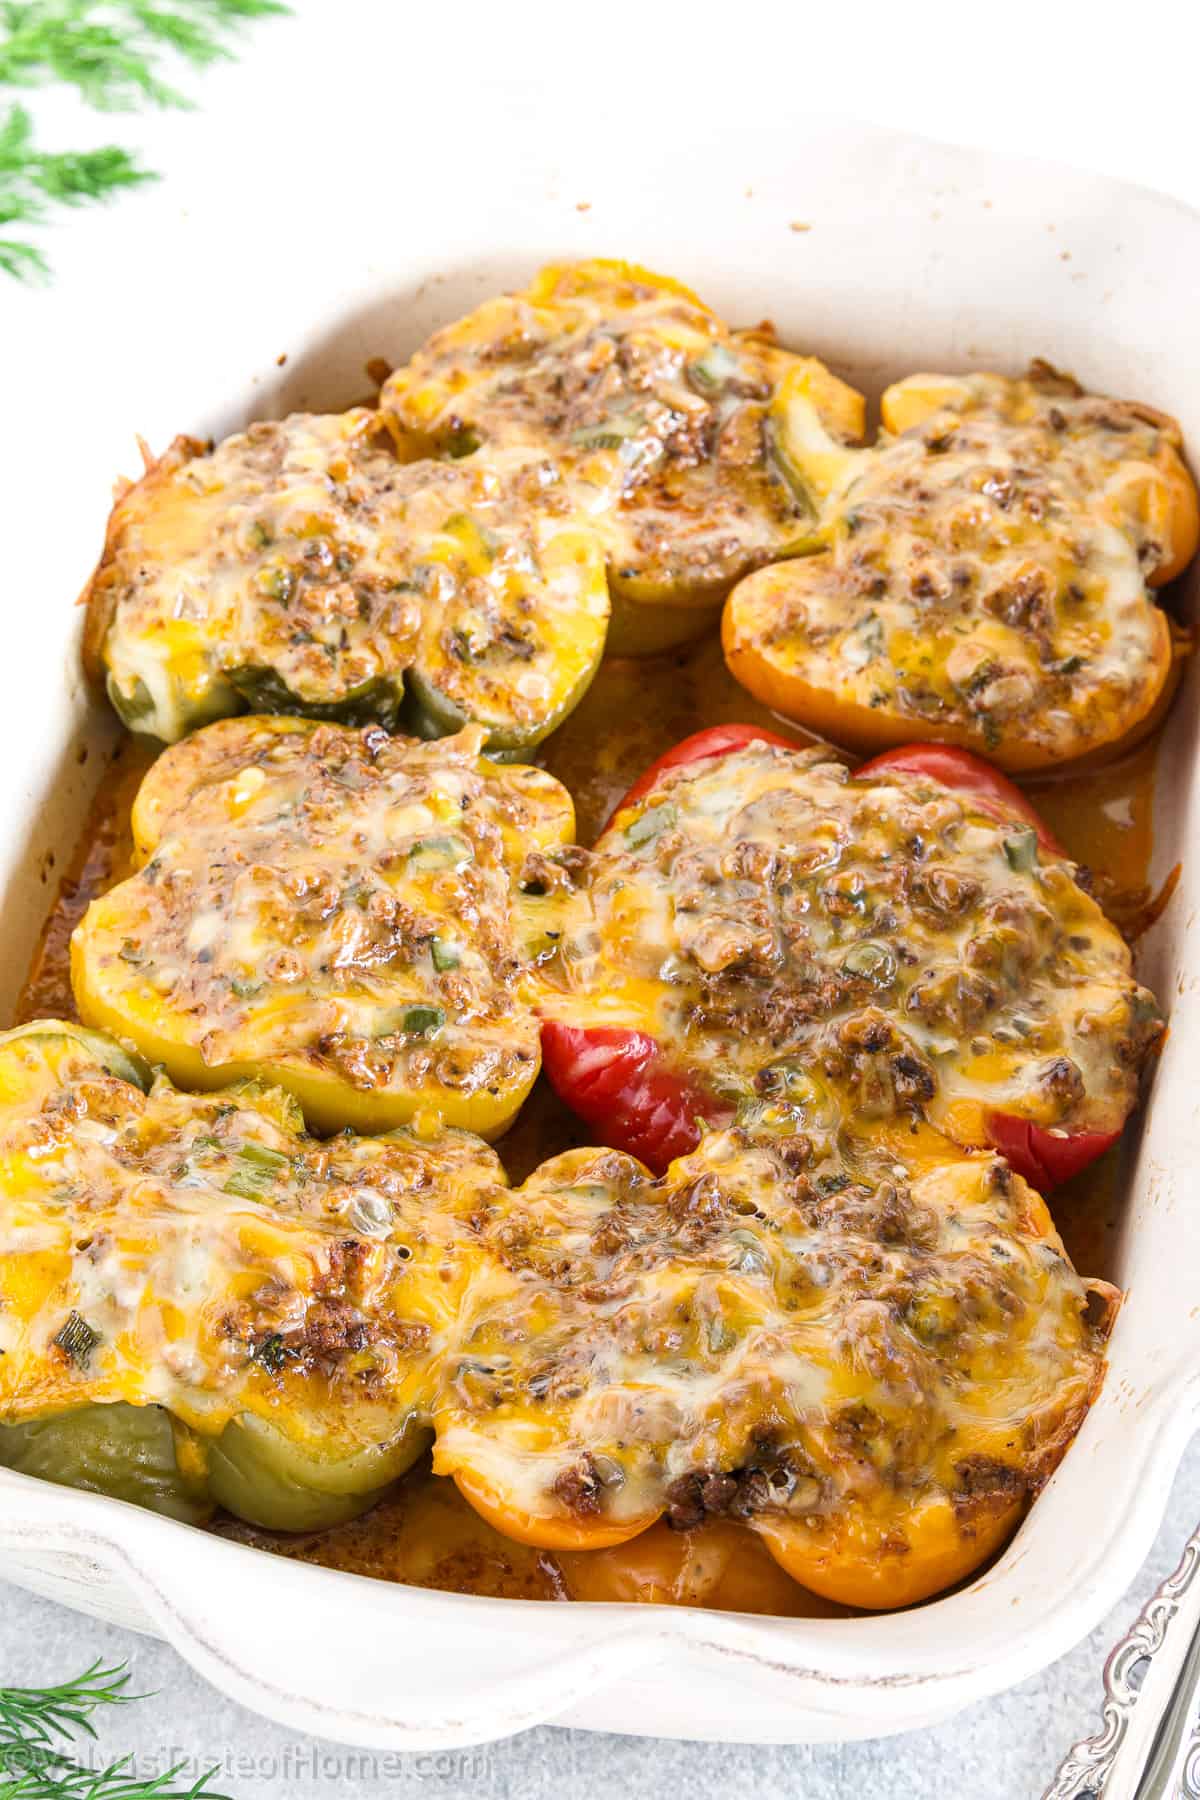 These Stuffed Bell Peppers are filled with a delicious mixture of ground beef, mushrooms, tomato sauce, topped with cheese, and then baked for the perfect meal!